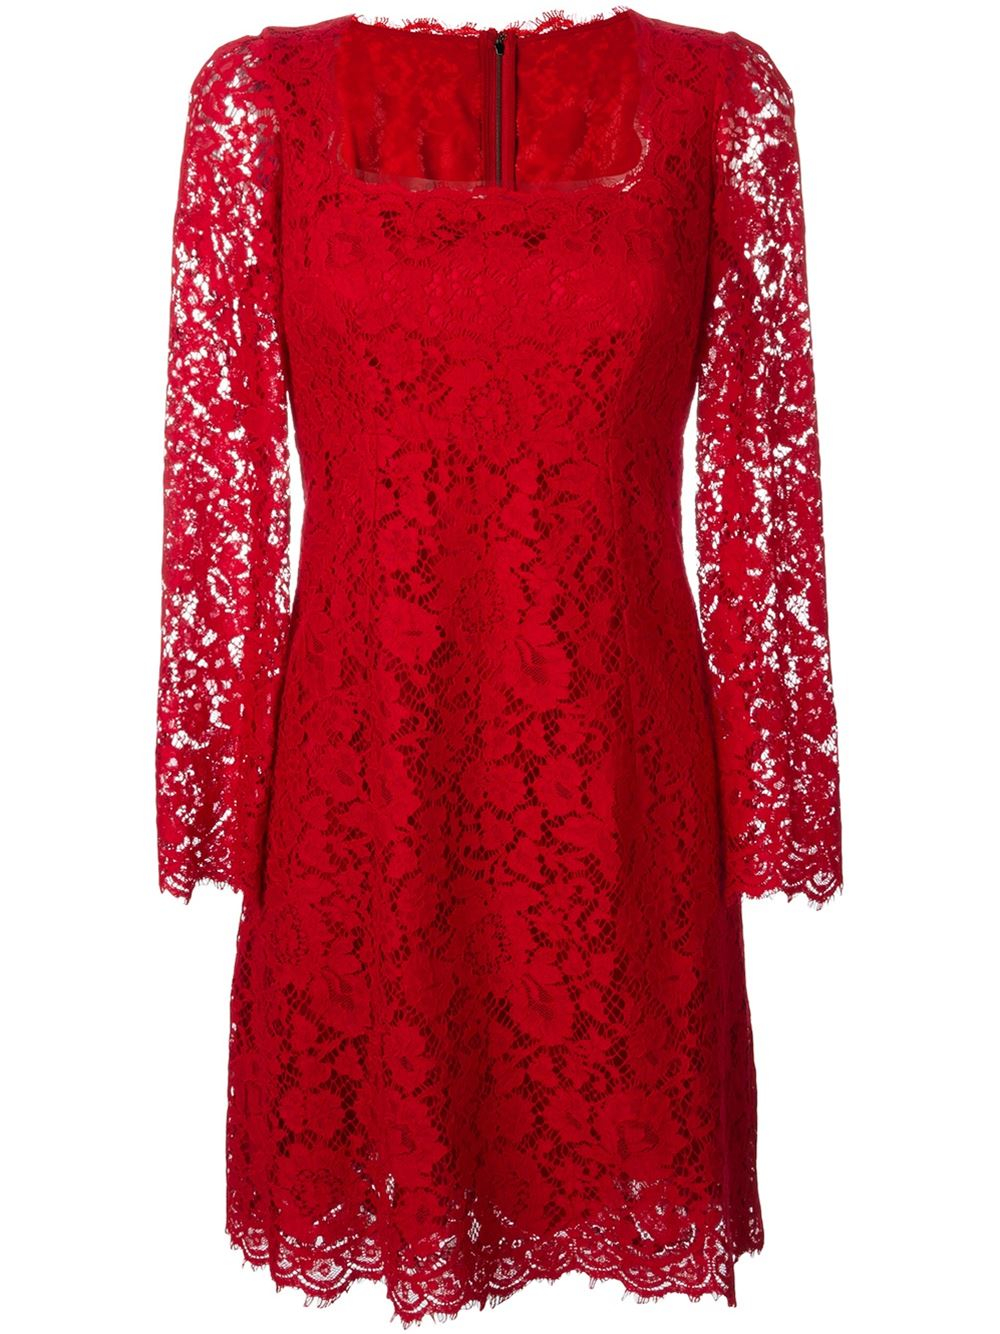 Dolce & Gabbana Lace Dress in Red - Lyst